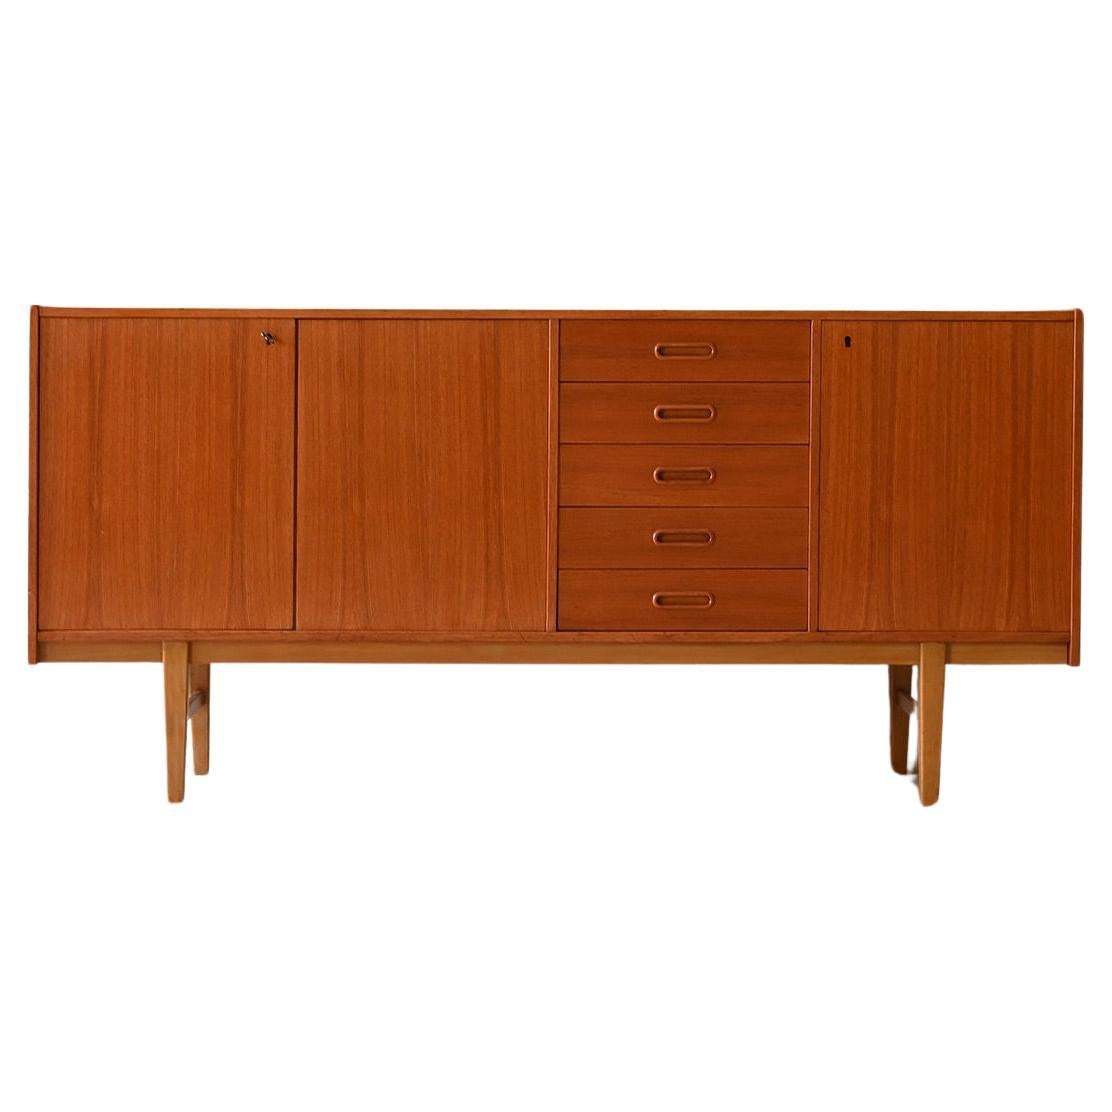 Nordic-made sideboard with drawers